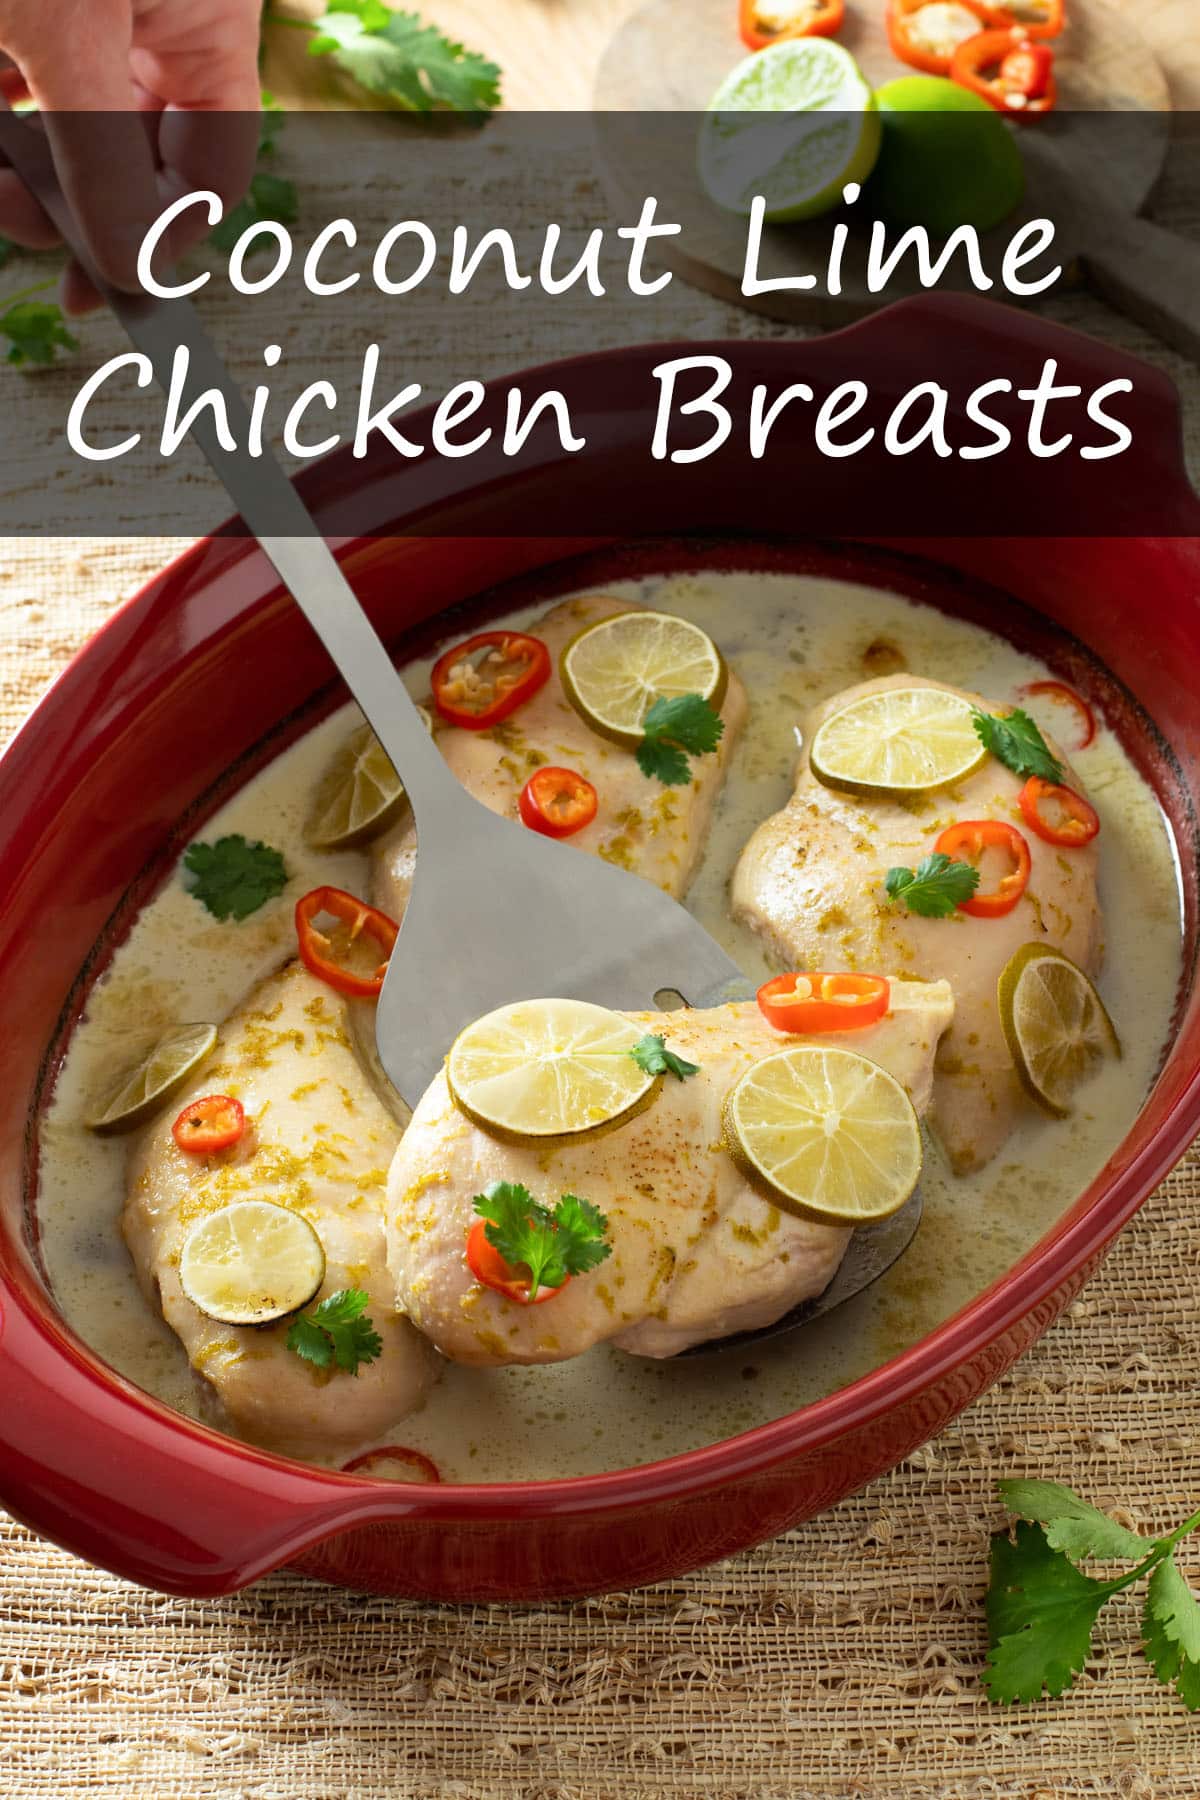 Coconut Lime Chicken Breasts